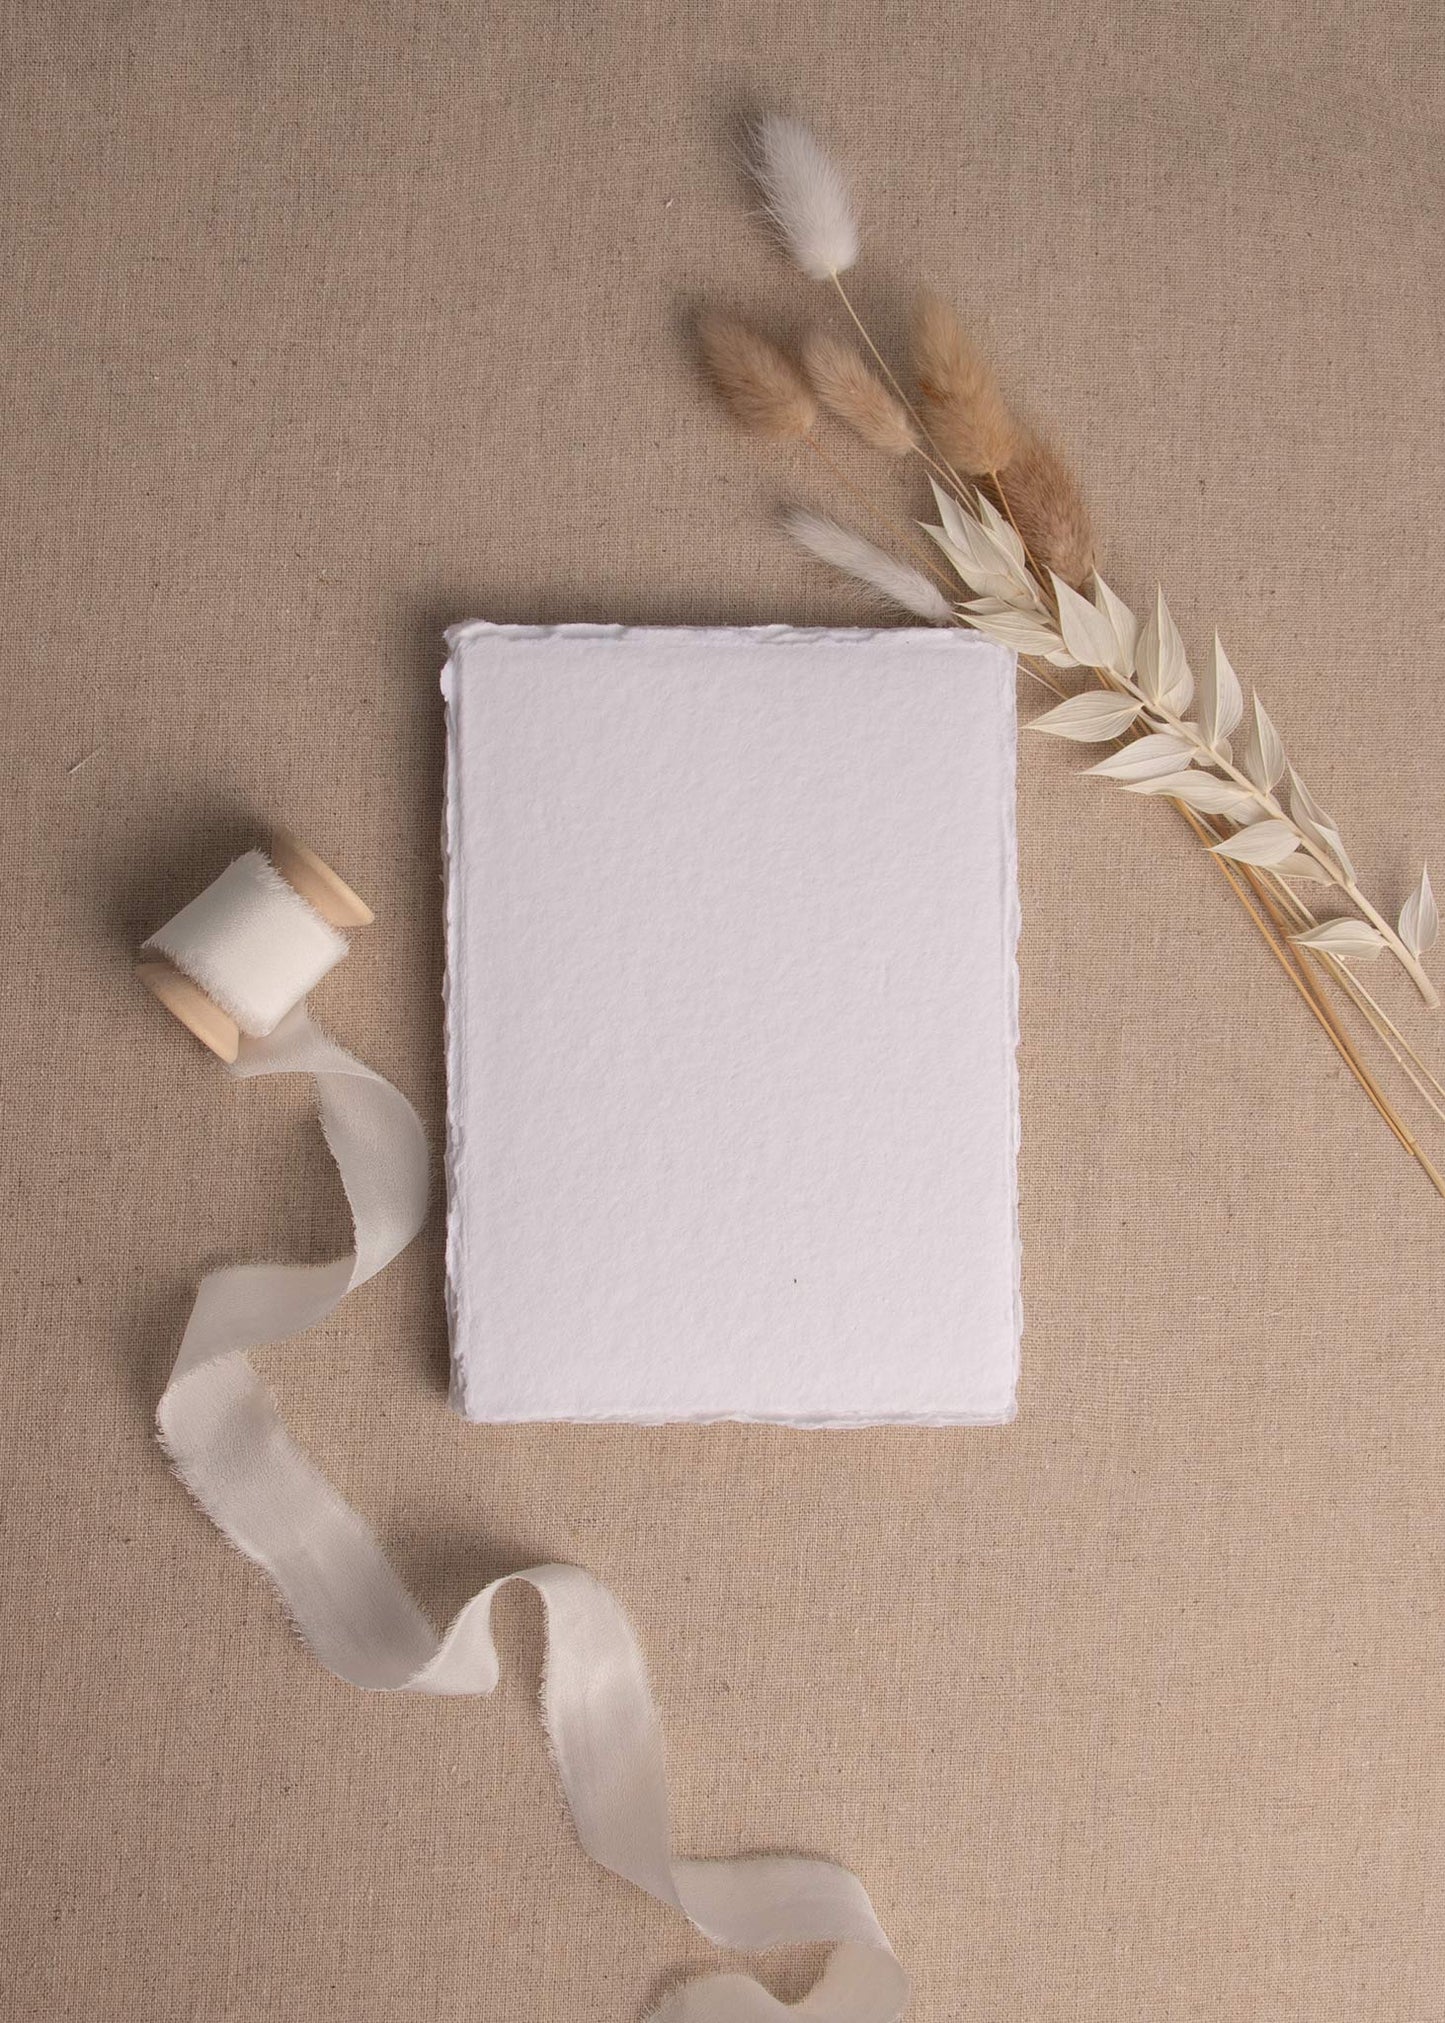 White Handmade paper with deckle edge on linen background surrounded by dried flowers and white silk ribbon spool